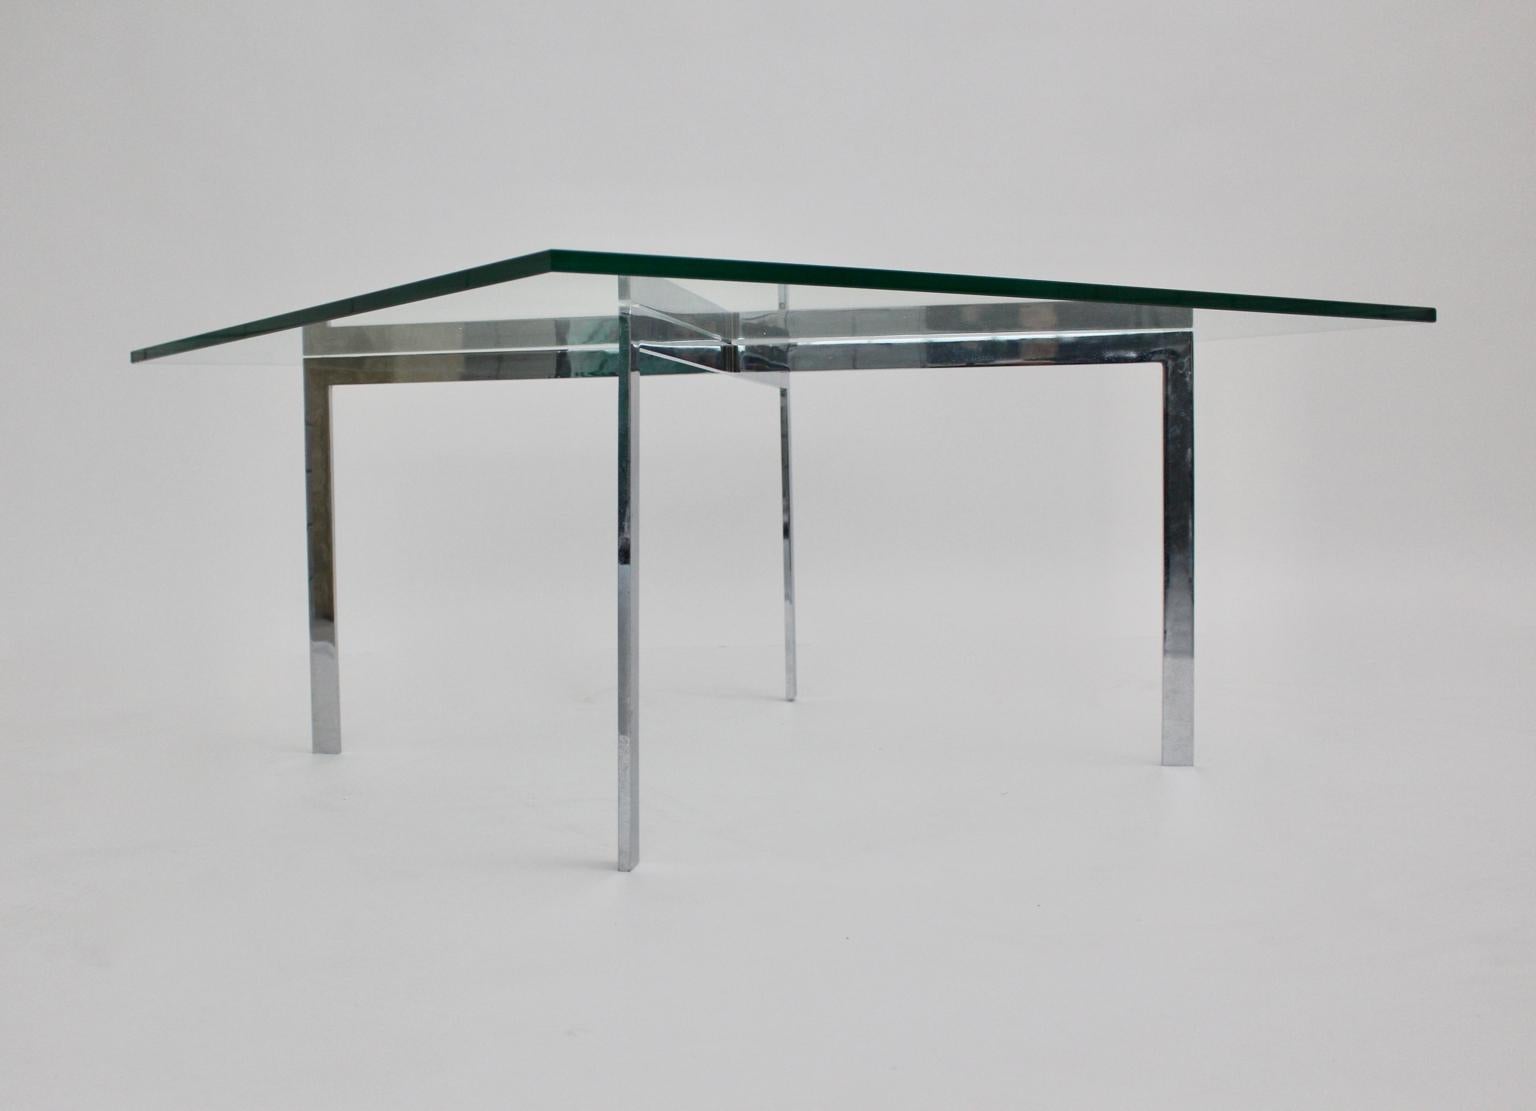 Metal Bauhaus Vintage Chrome Glass Coffee Table Barcelona by Mies van der Rohe, 1929 For Sale